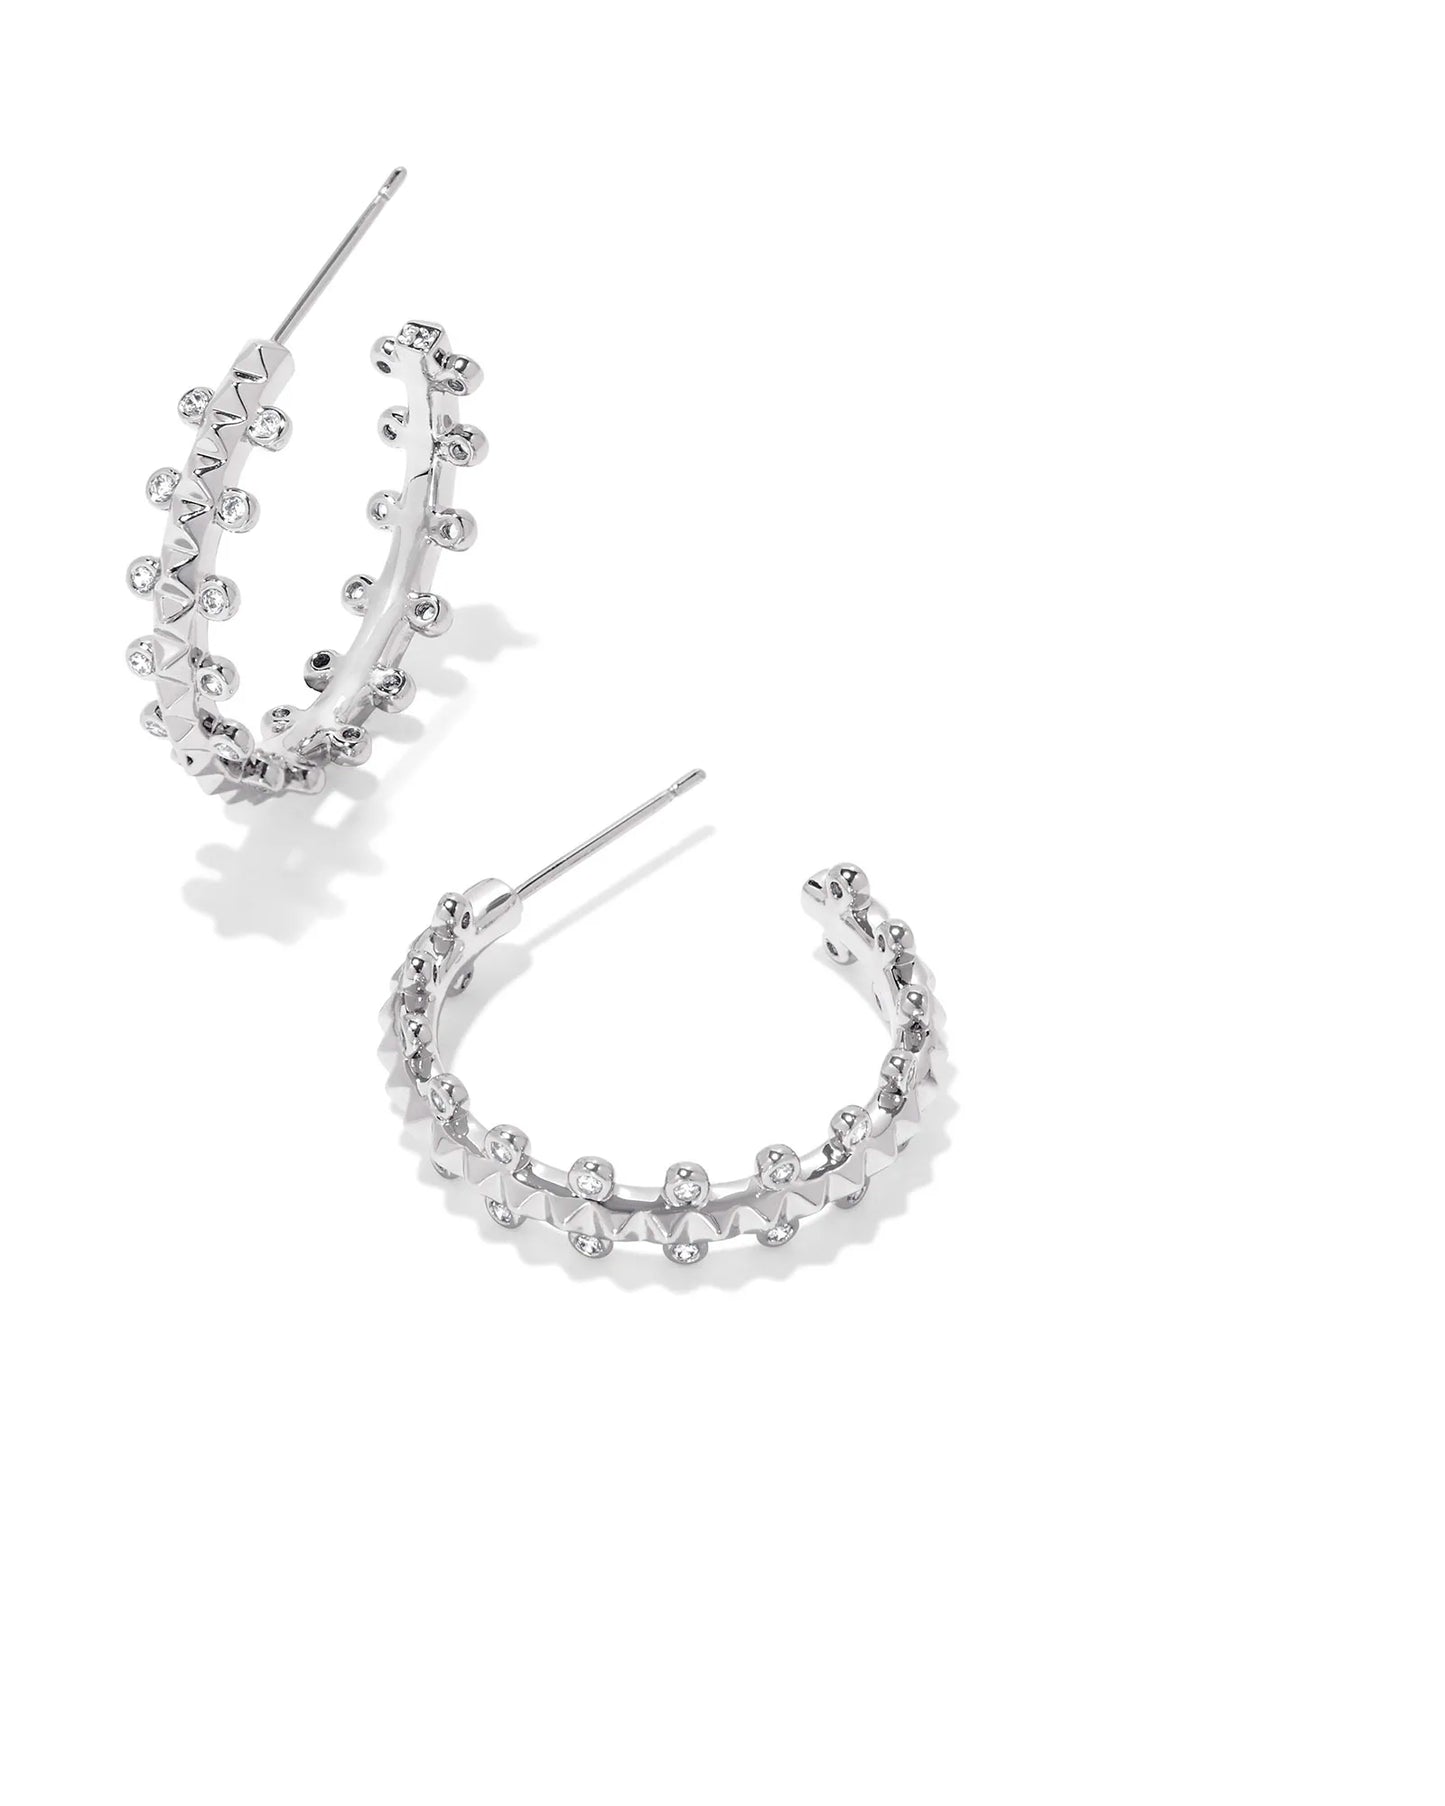 Silver hoop earrings with post backs. White crystalized Detail